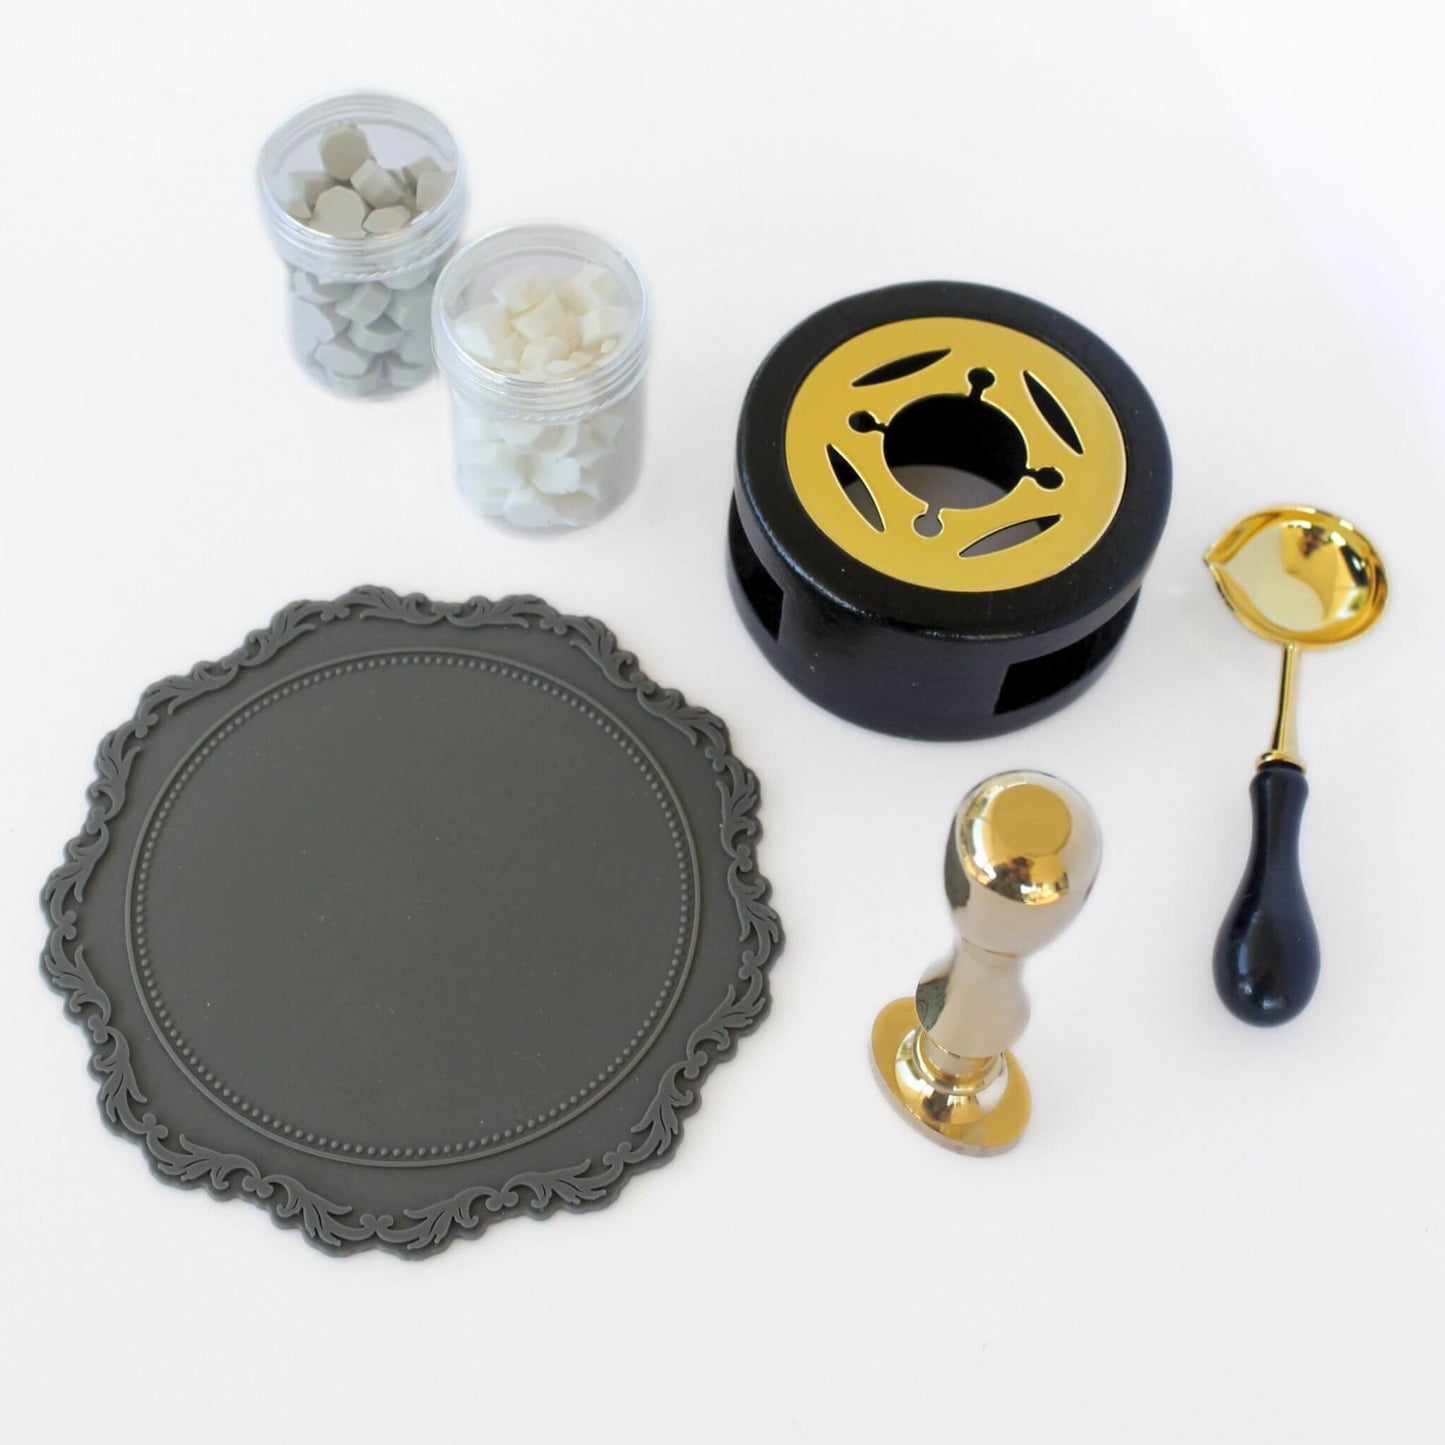 solid grass wax seal with Goddess design, grey wax seal mat, black and gold wax melting tove and spoon set and grey and white wax sealing beads